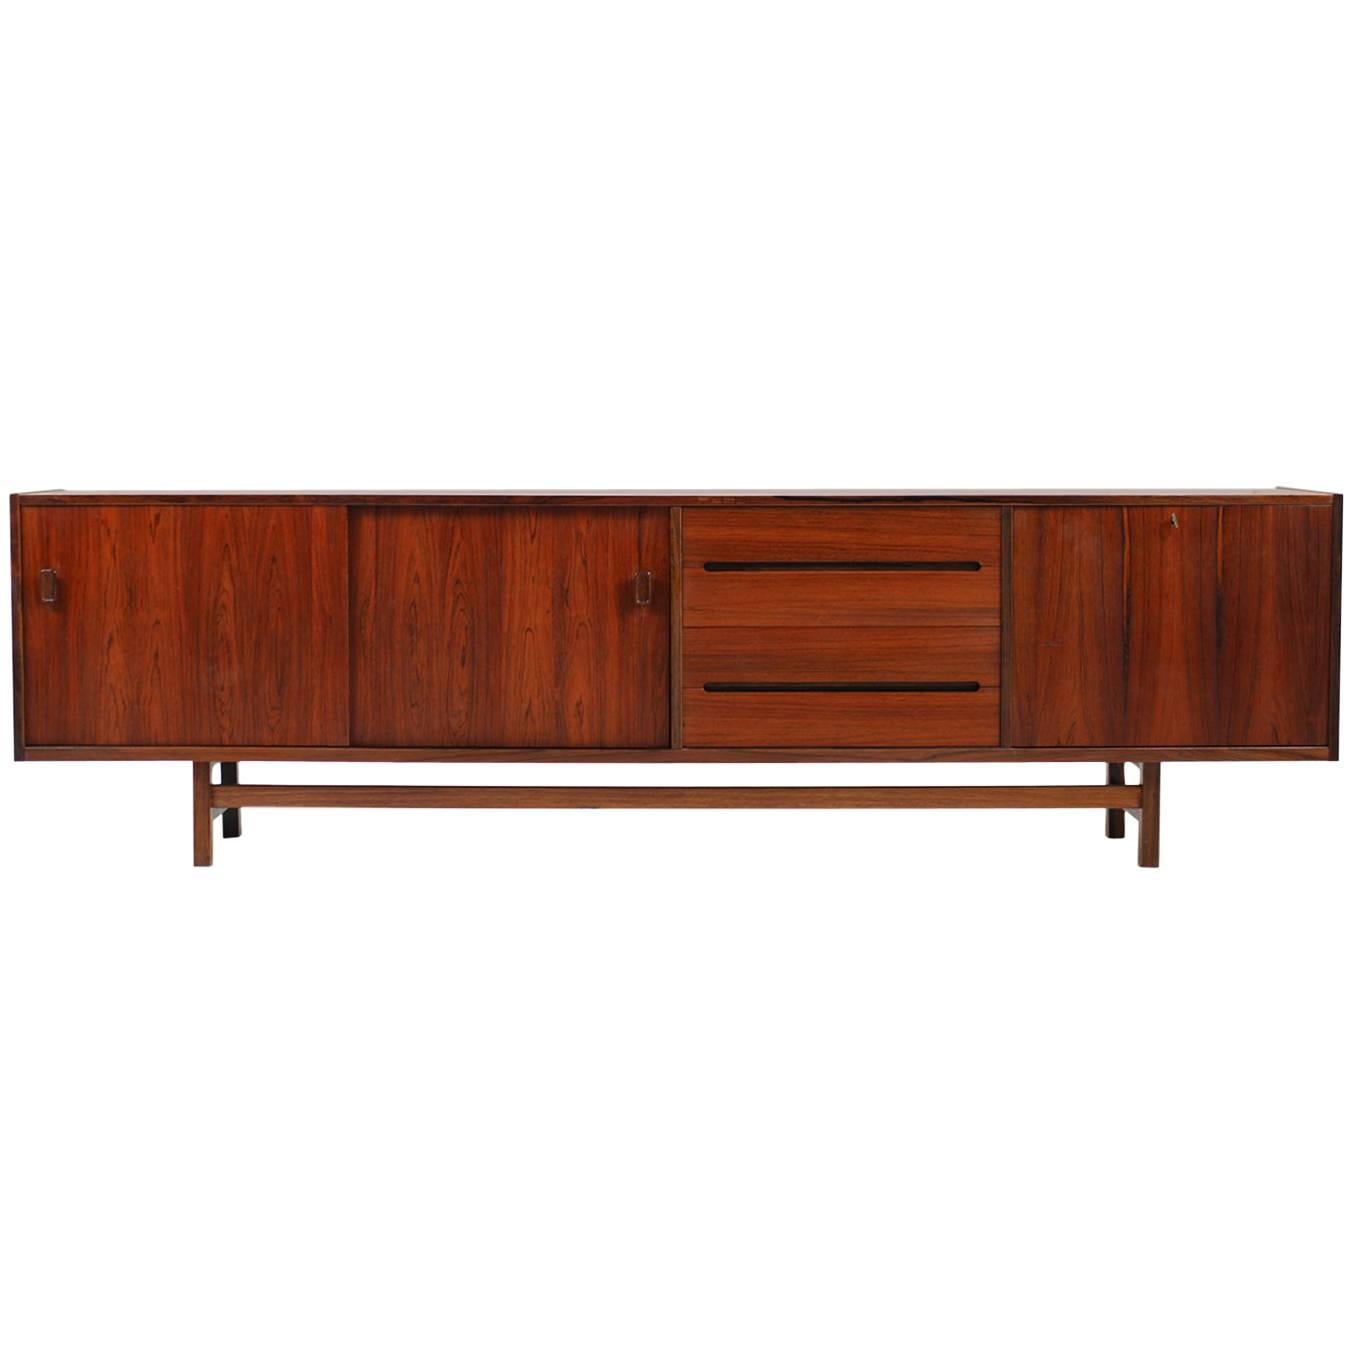 Very Rare 1960s Nils Jonsson Sideboard Mod. Grand for Troeds, Sweden